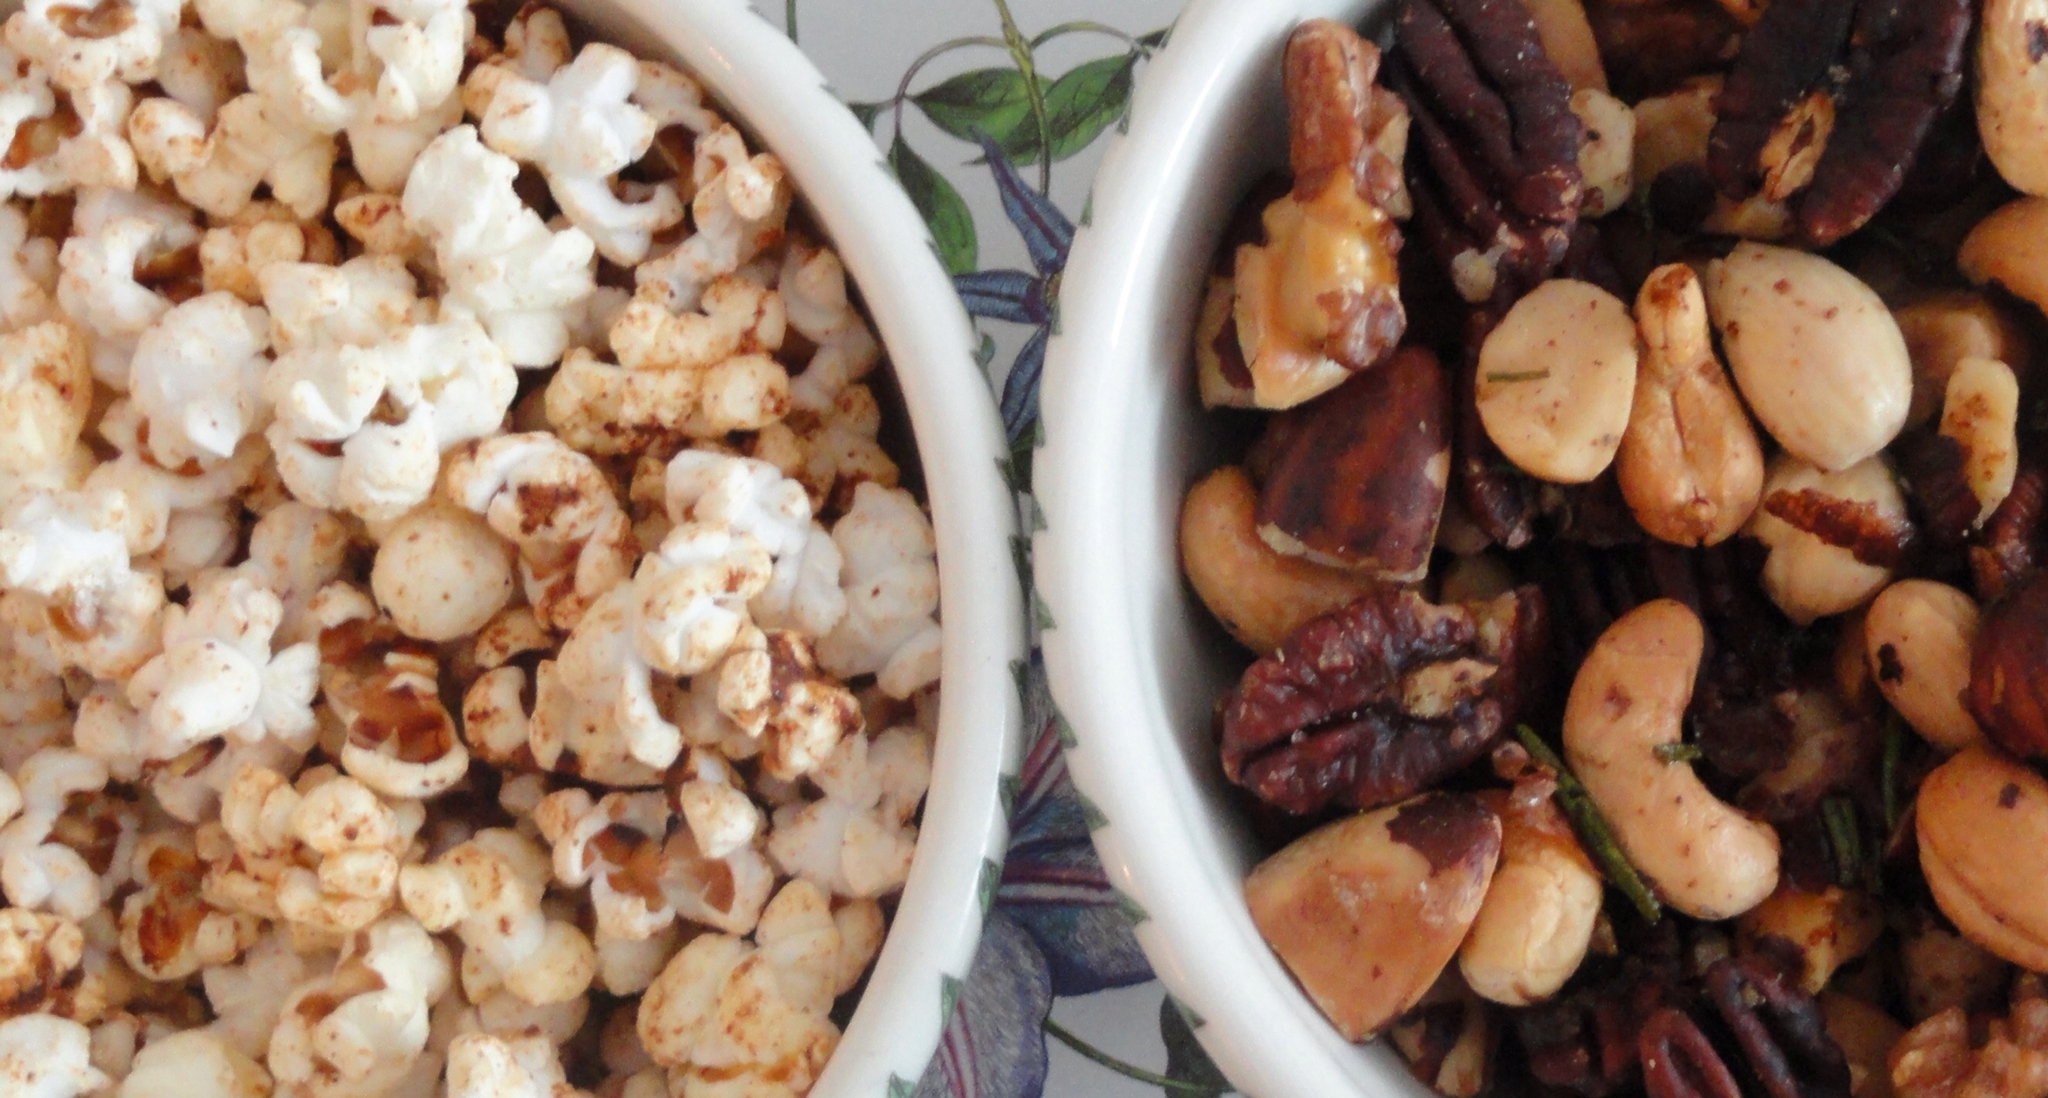 Popcorn, Nuts, Rice Crackers Snack Mix